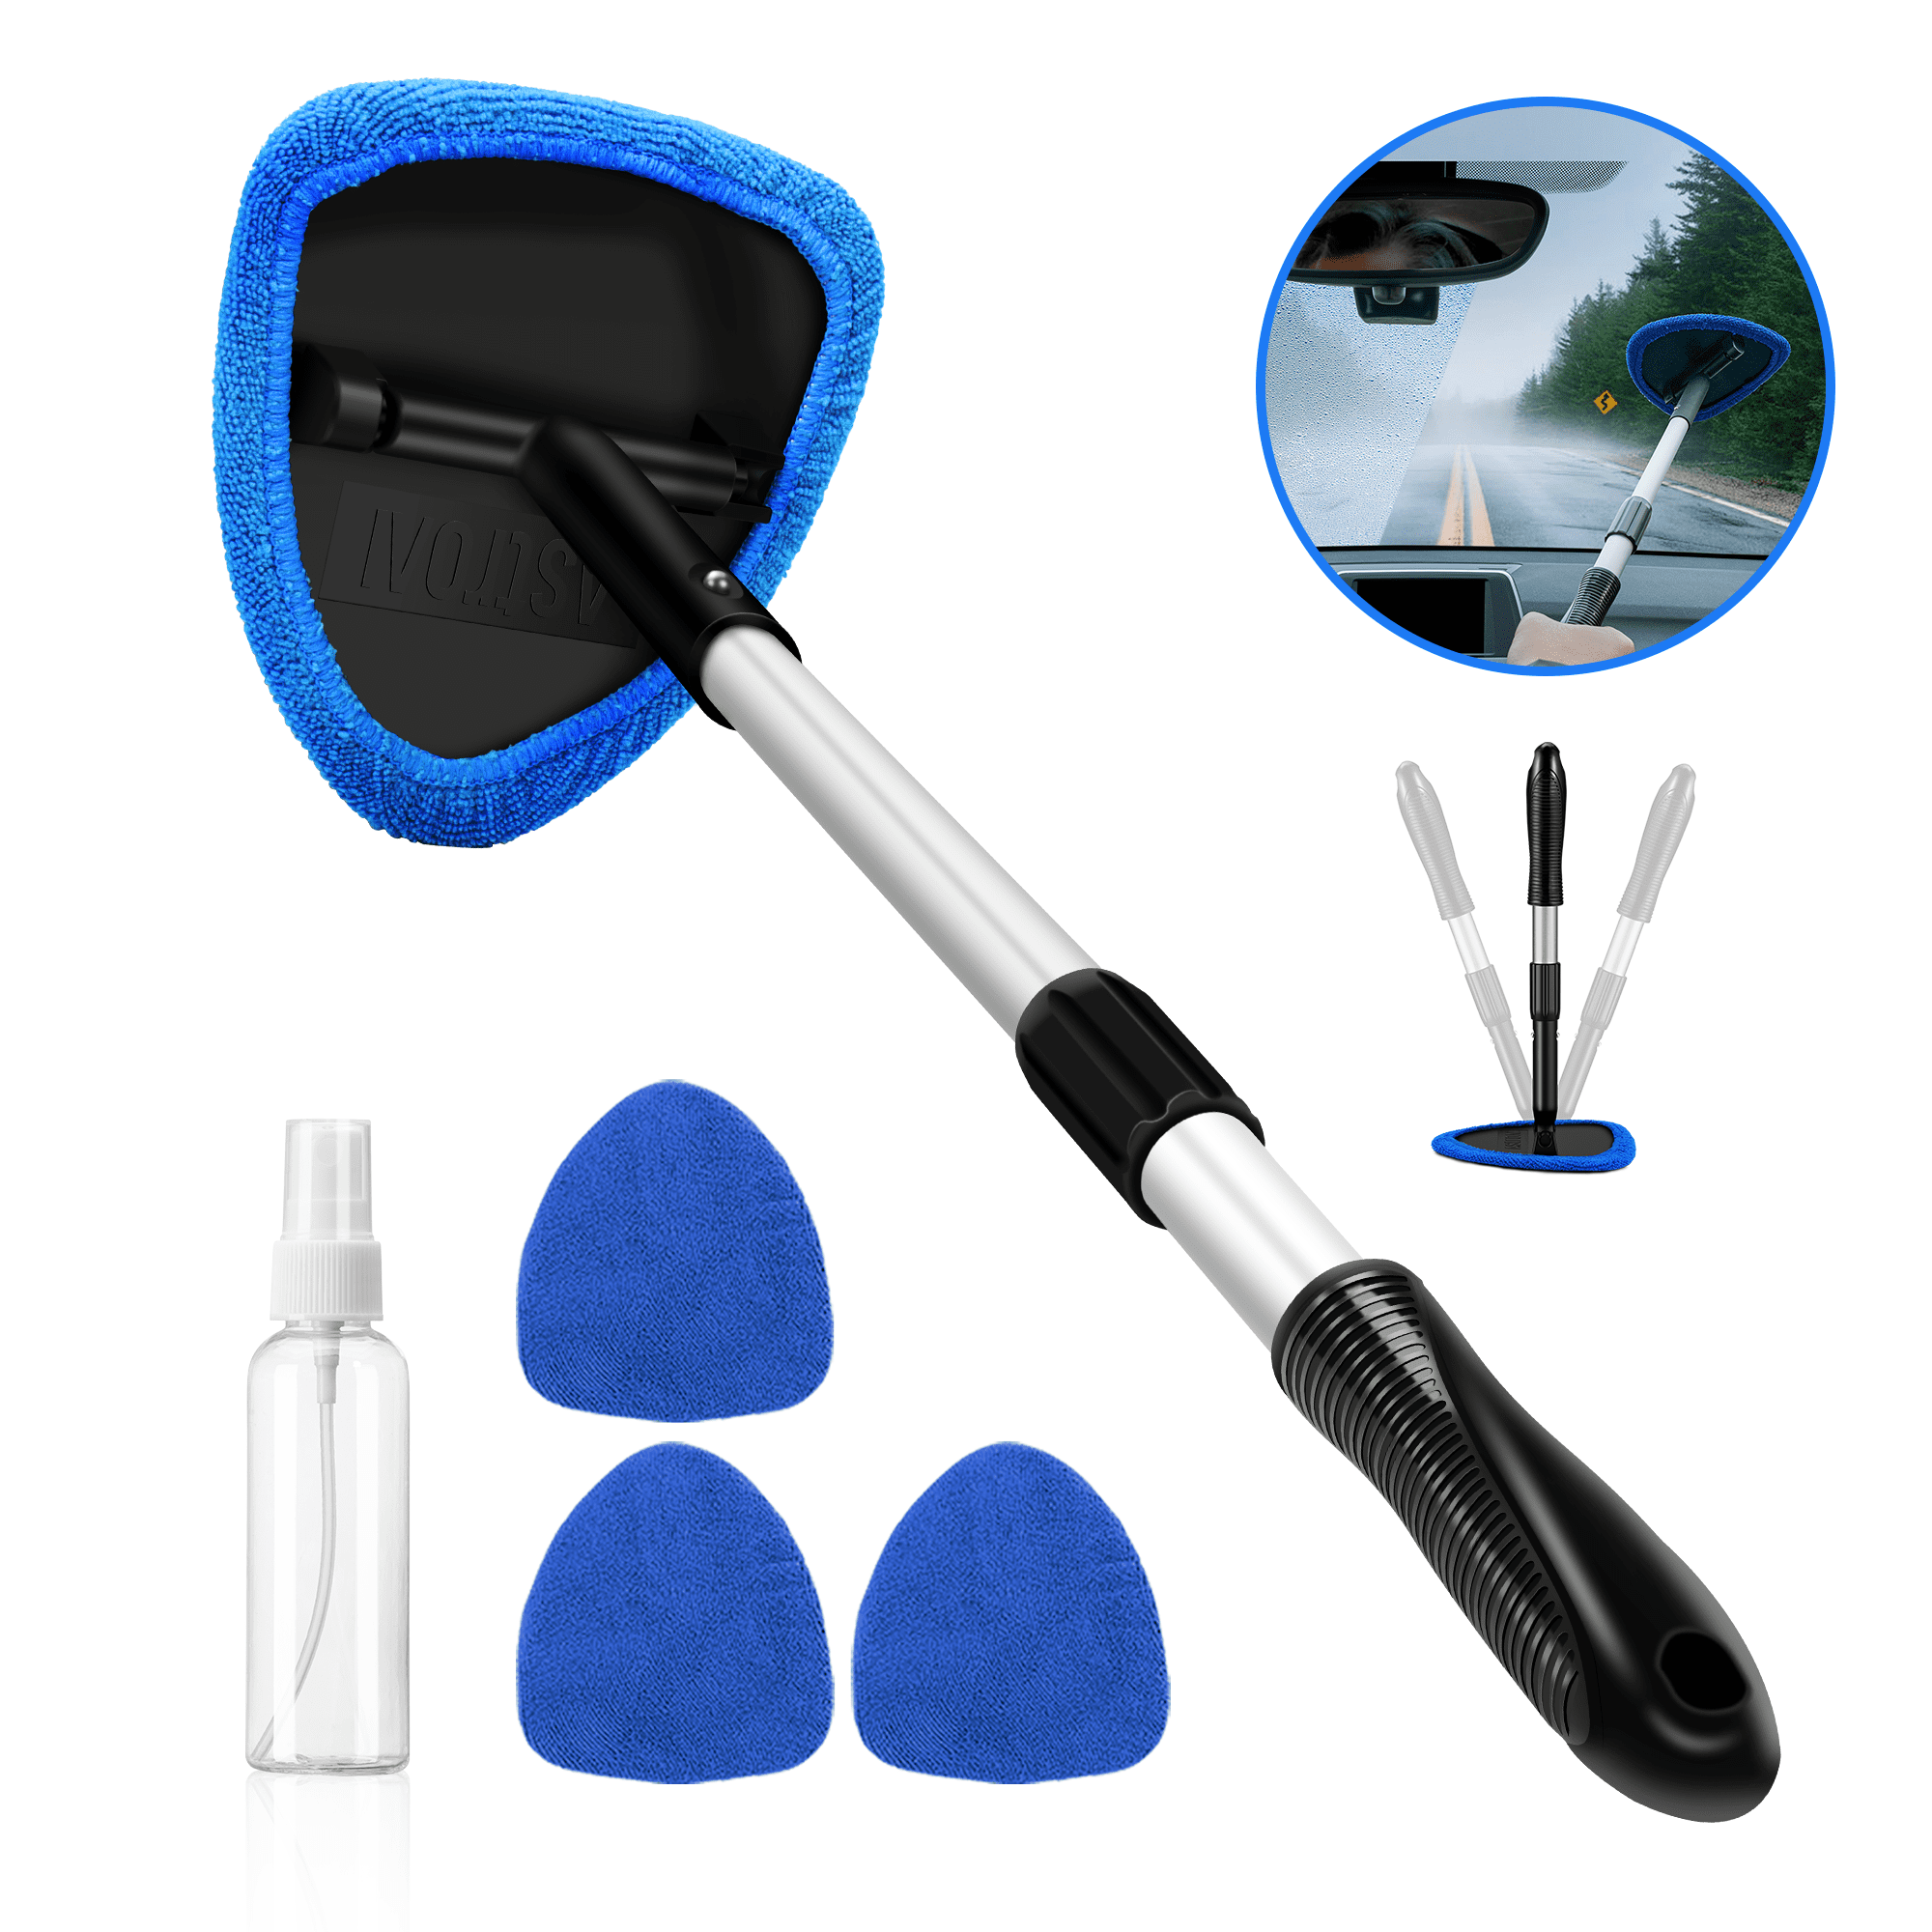 KwoKmarK Windshield Cleaner Tool Car Window Cleaning Wand Glass Microfiber  Brush Bigger Pad Thicker Softy Cloth, with Towel Spray Bottle Cloth Bag Kit  TTL 6Pcs